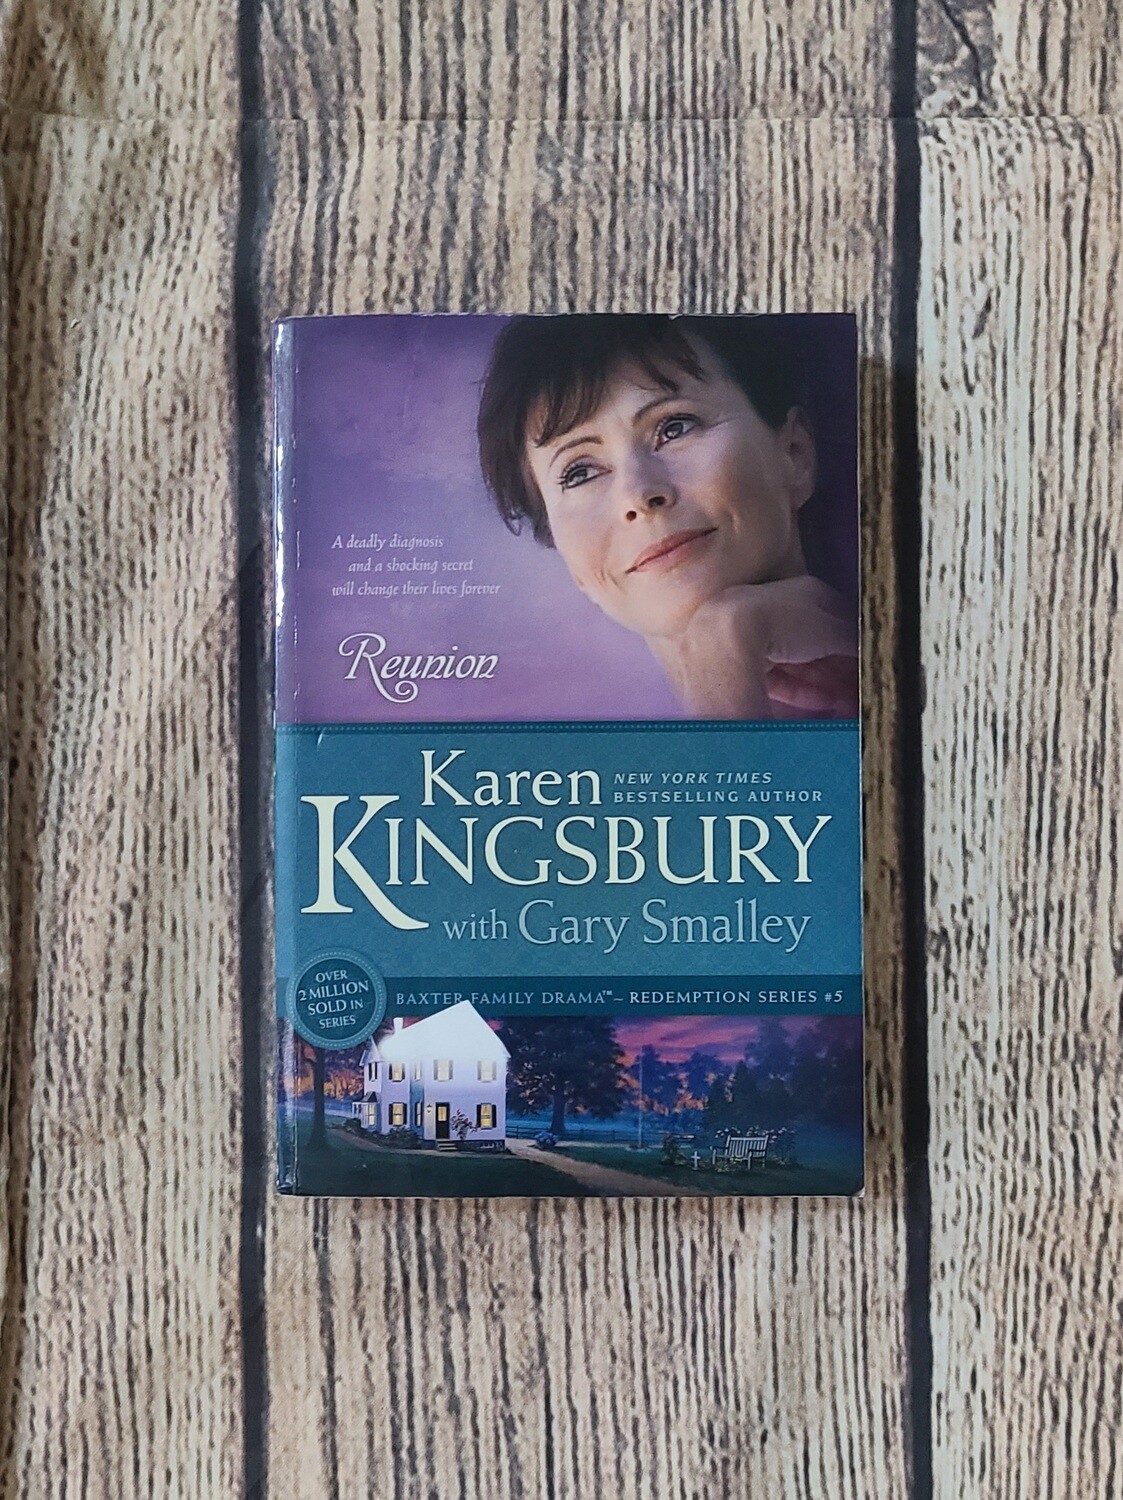 Reunion by Karen Kingsbury with Gary Smalley - Paperback - Great Condition